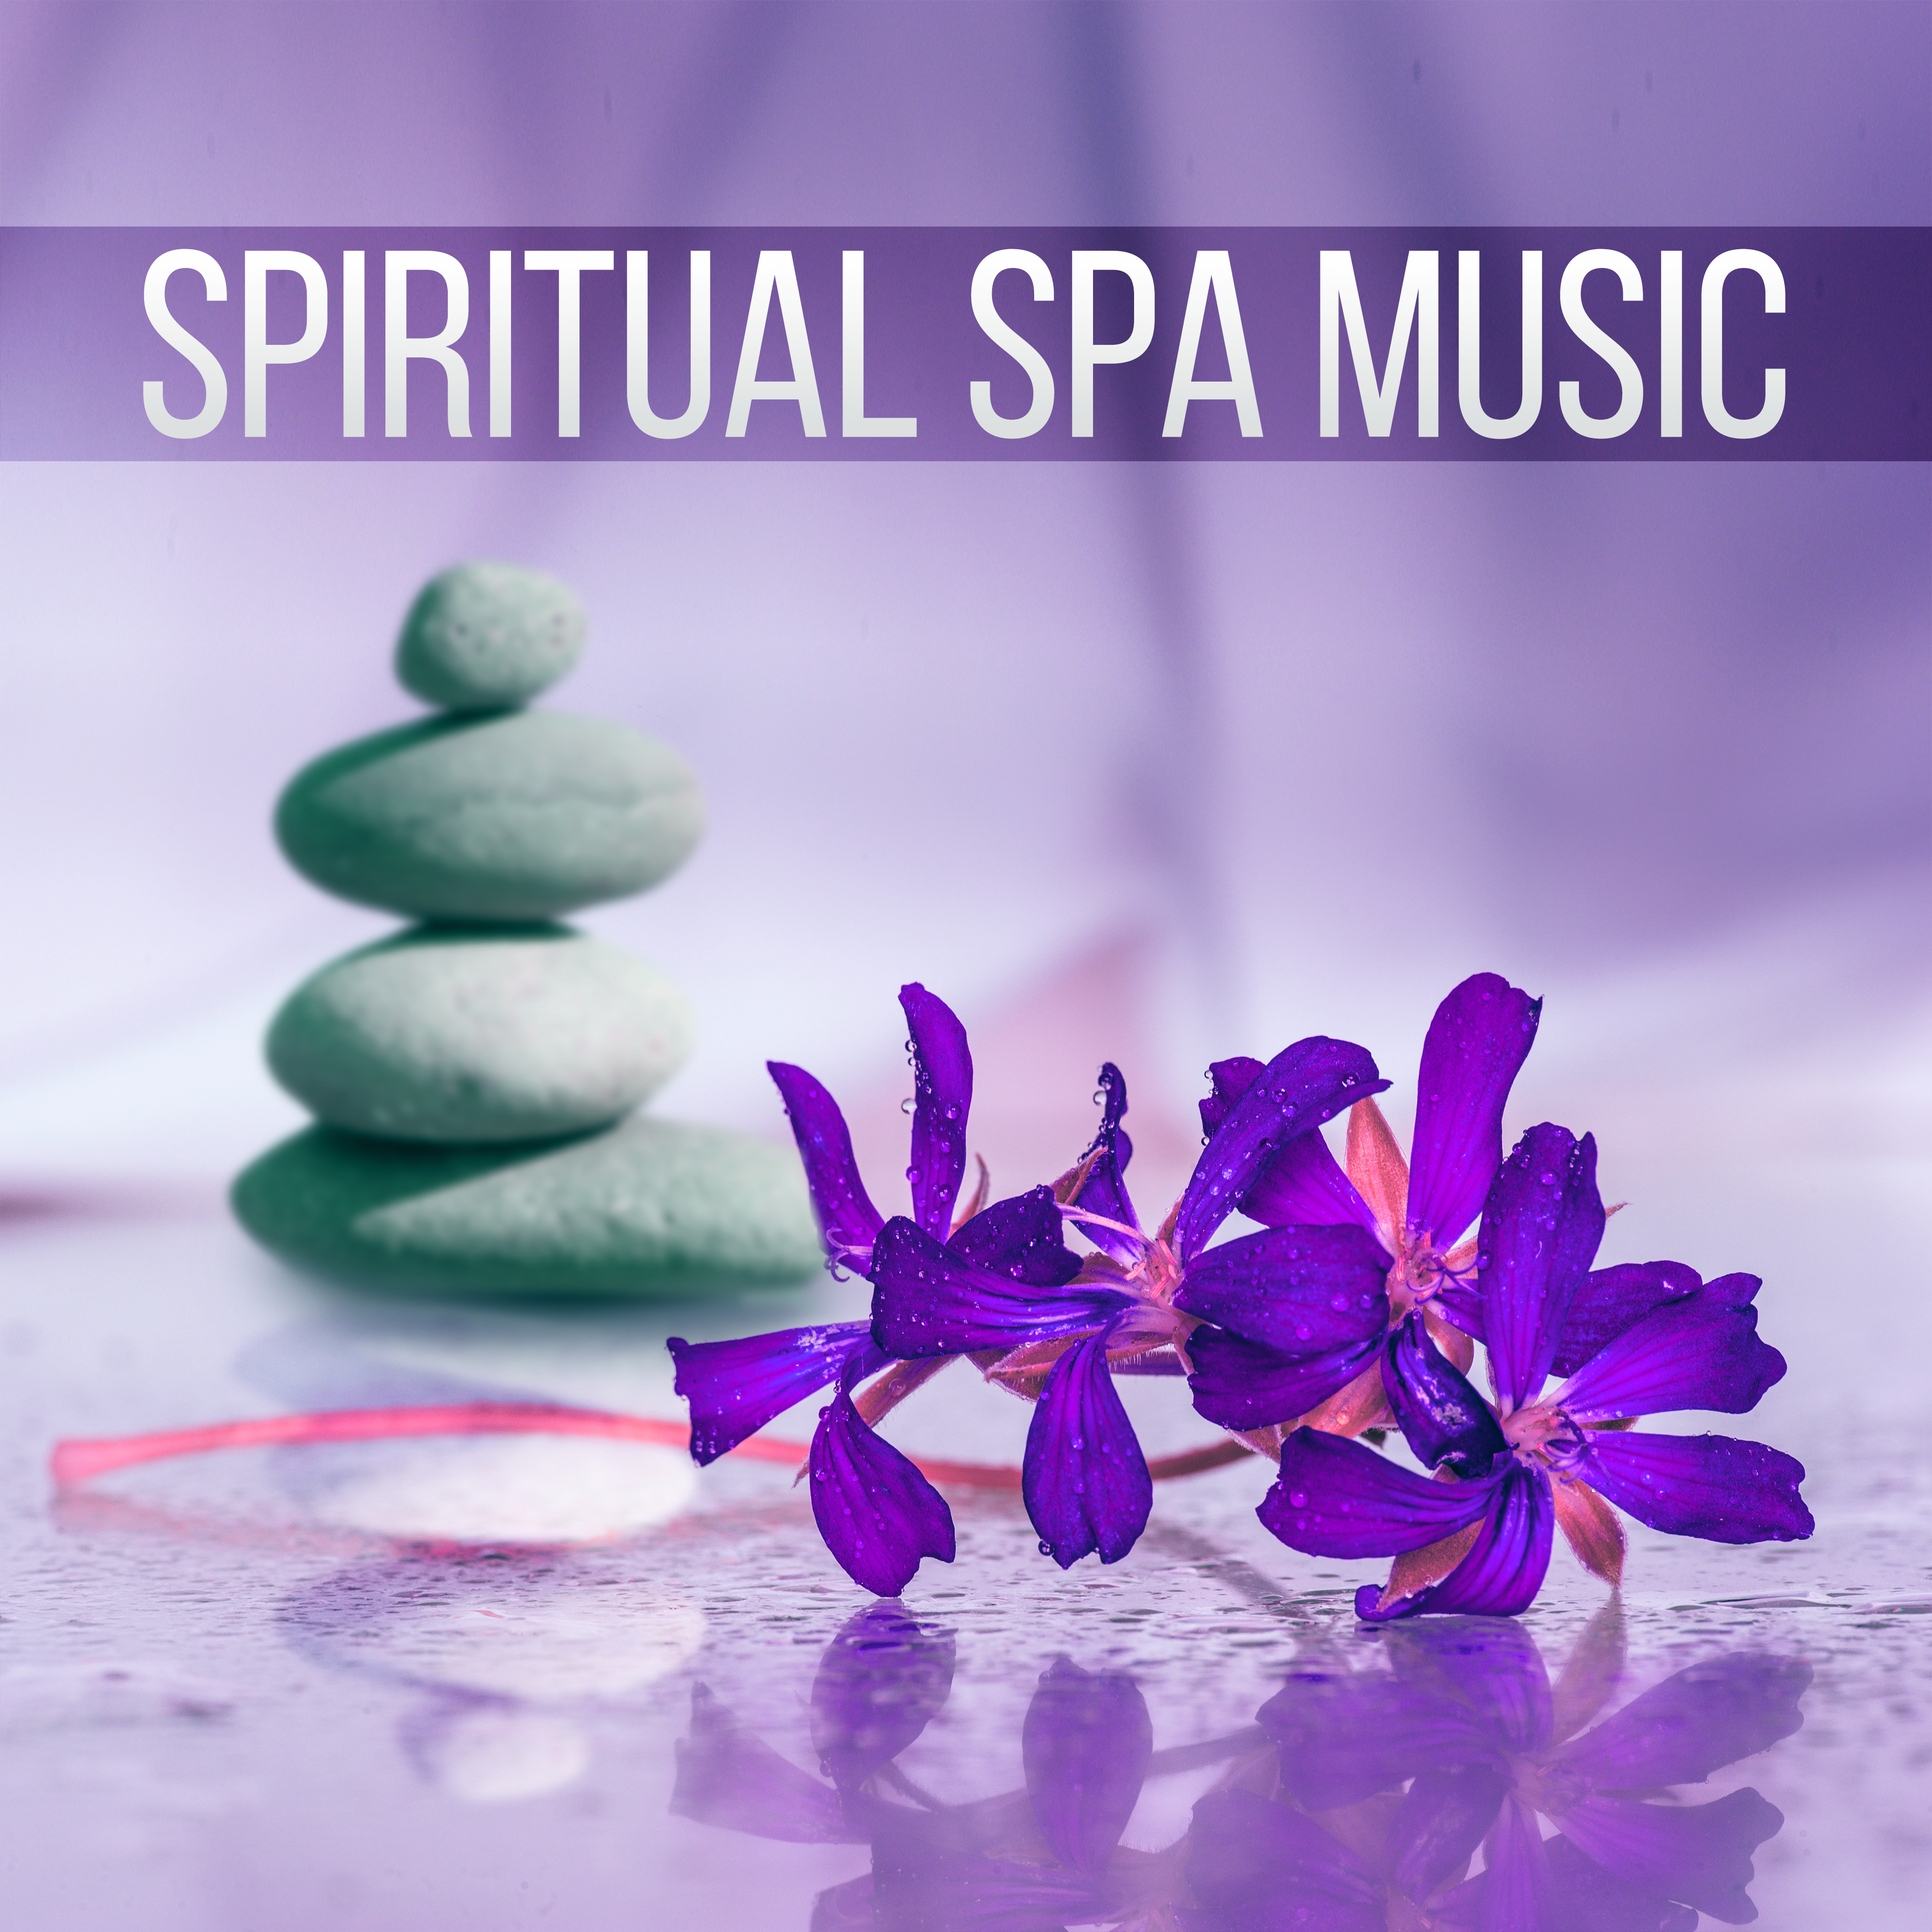 Spiritual Spa Music  Spa Music, Background Music, Relaxation, Liquid Songs, Sounds of Nature, Massage, Good Mood, Well Being